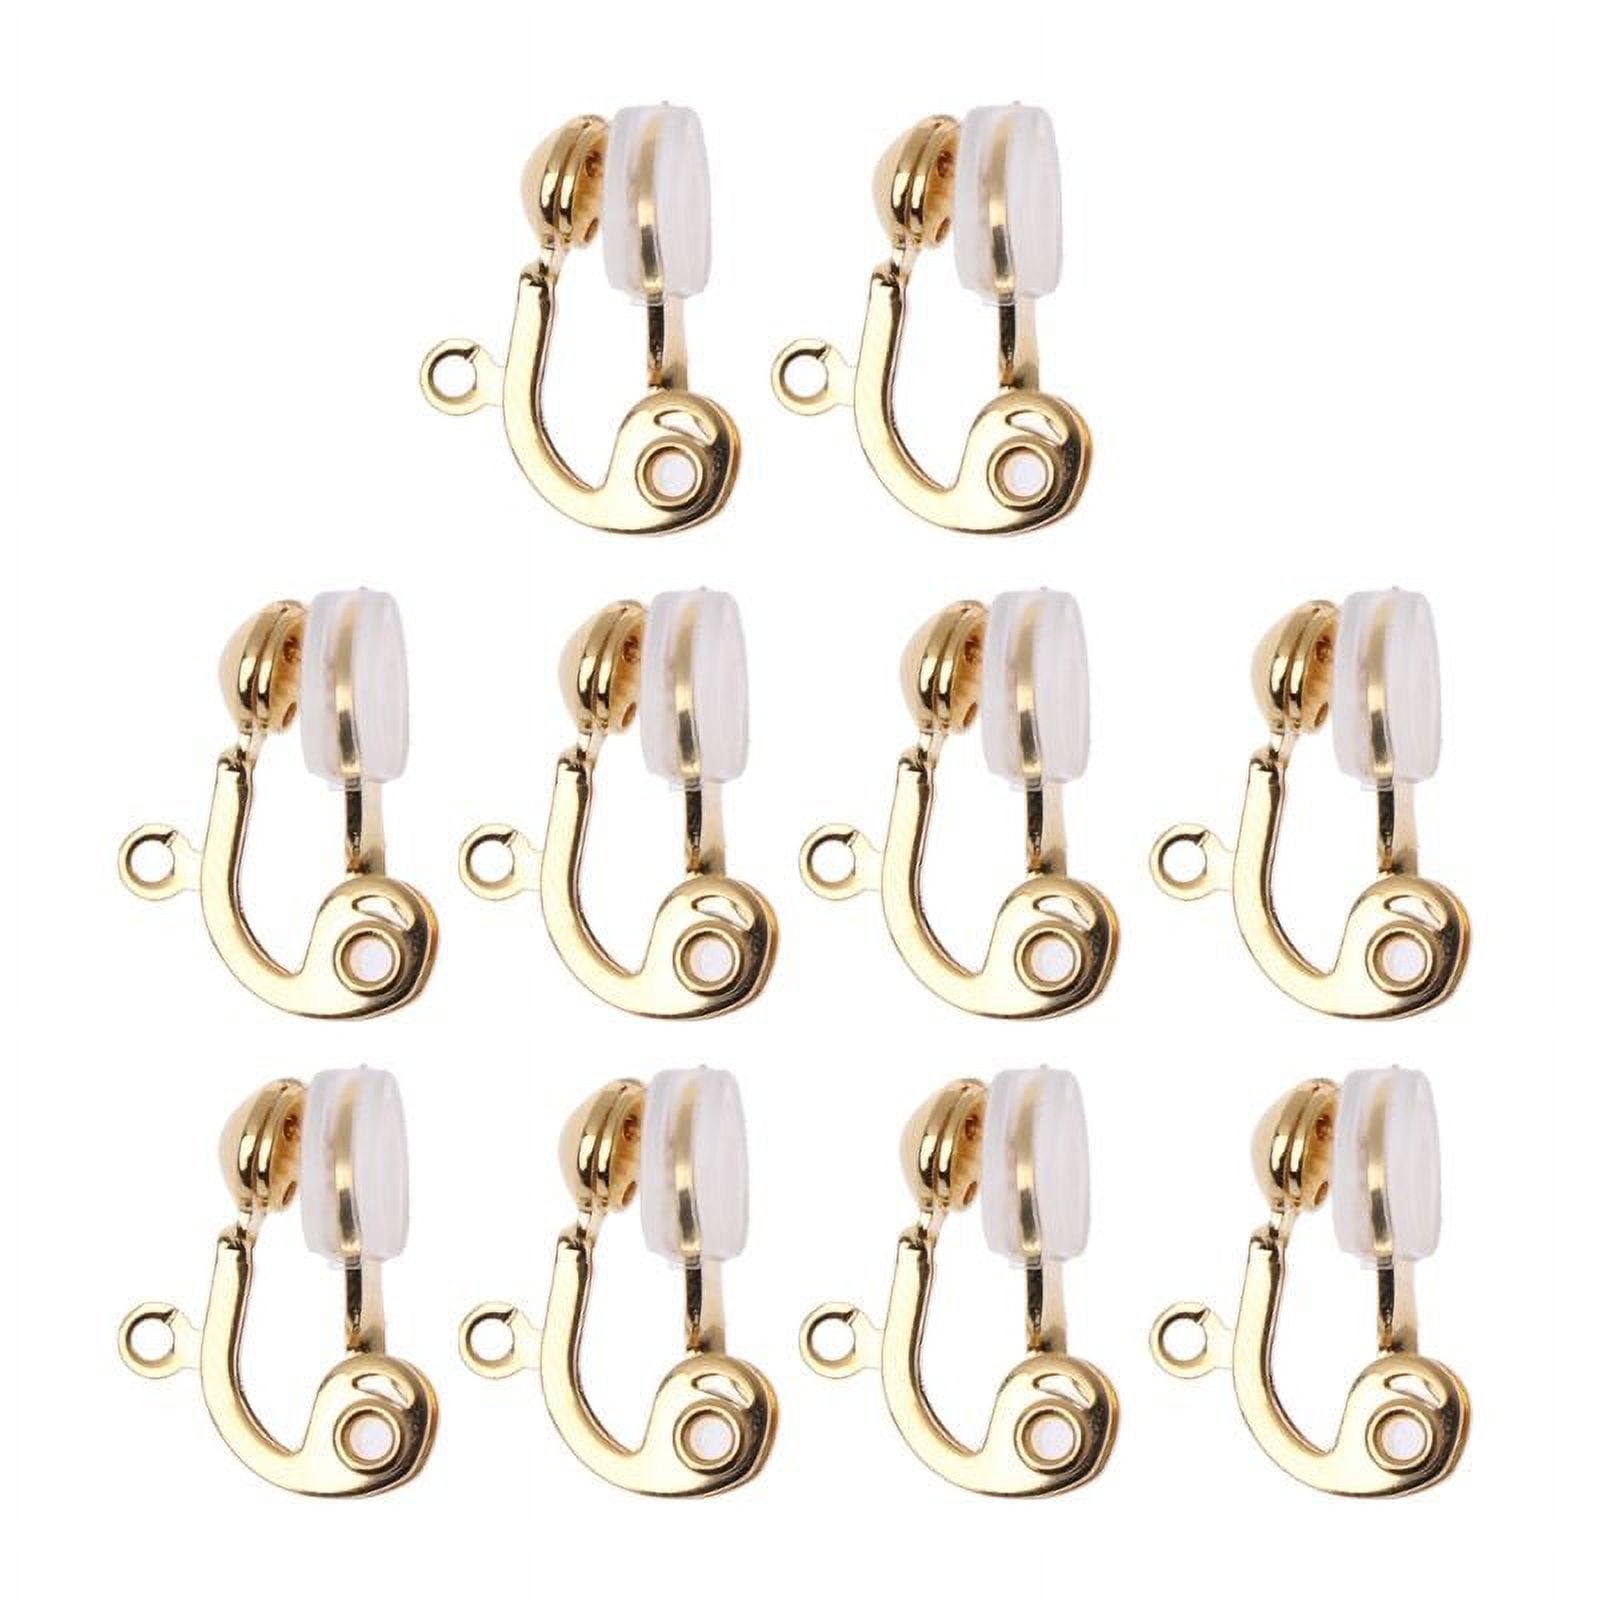 18 Pieces Clip-on Earrings Converter with Silicone Earring Pads 3 Colors  Clip-on Earring Converter with Easy Open Loop for None Pierced Ears DIY